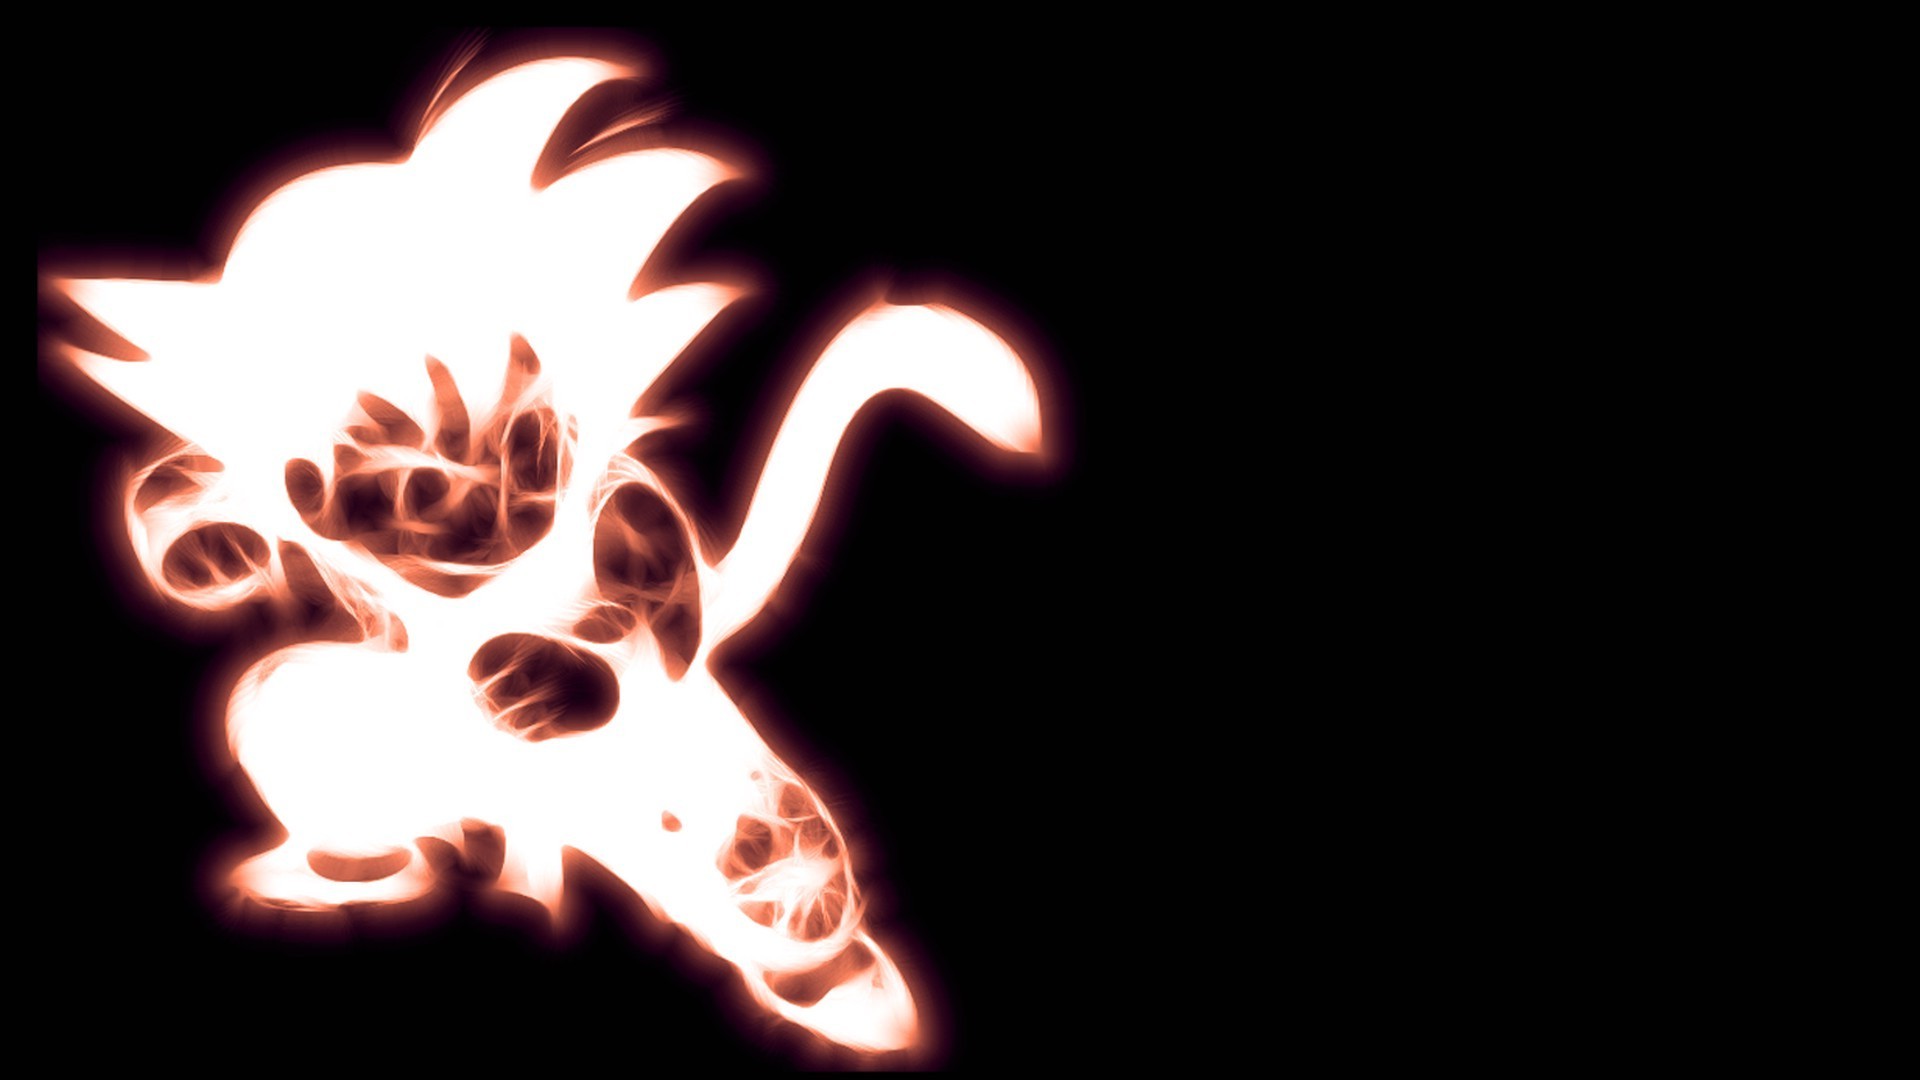 Wallpaper Kid Goku HD with image resolution 1920x1080 pixel. You can make this wallpaper for your Desktop Computer Backgrounds, Mac Wallpapers, Android Lock screen or iPhone Screensavers